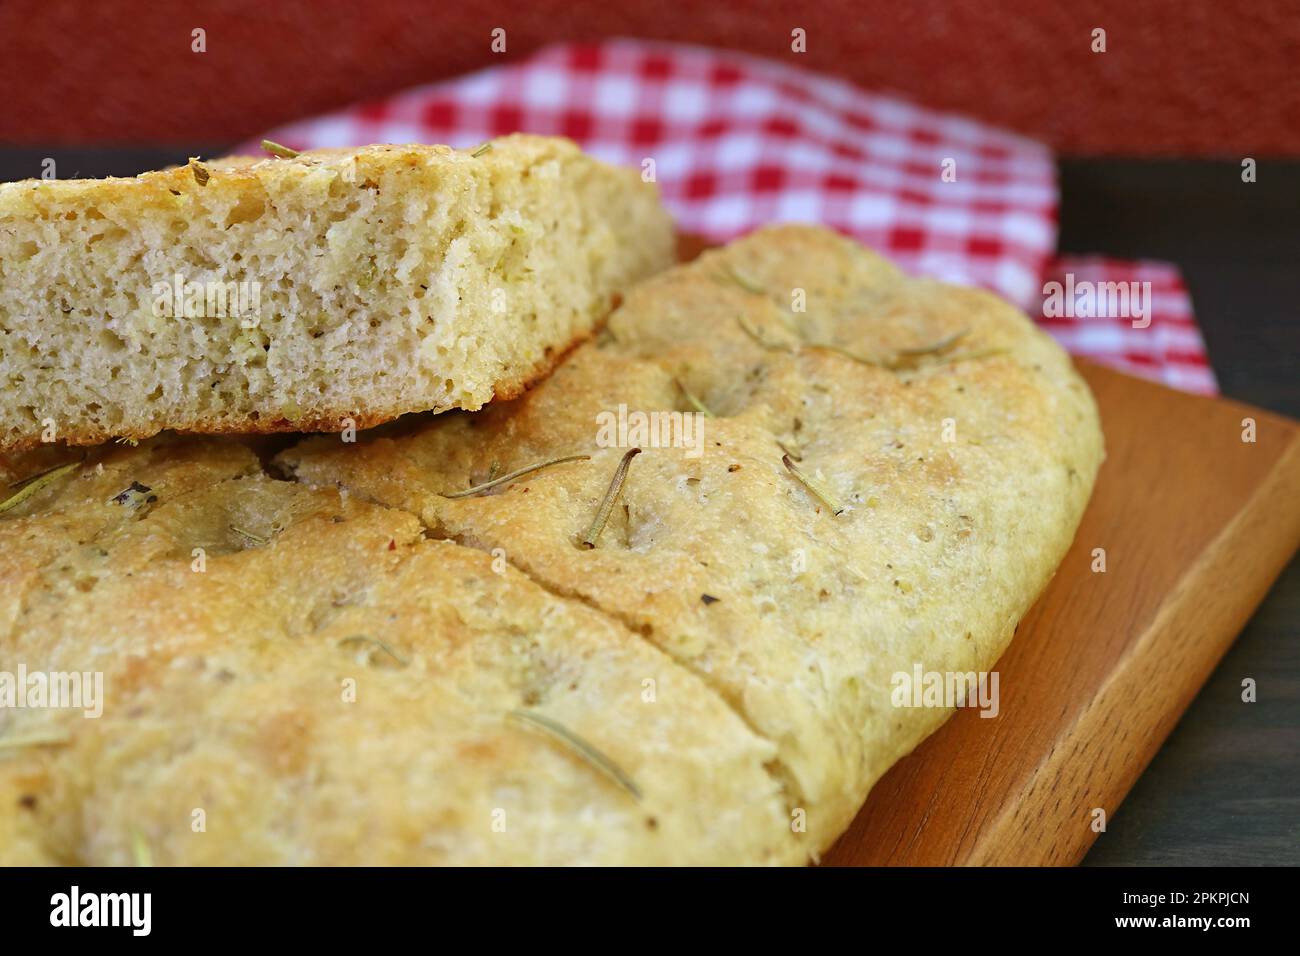 Closeup the Texture of Aromatic Rosemary Focaccia Bread Slices on Wooden Breadboard Stock Photo